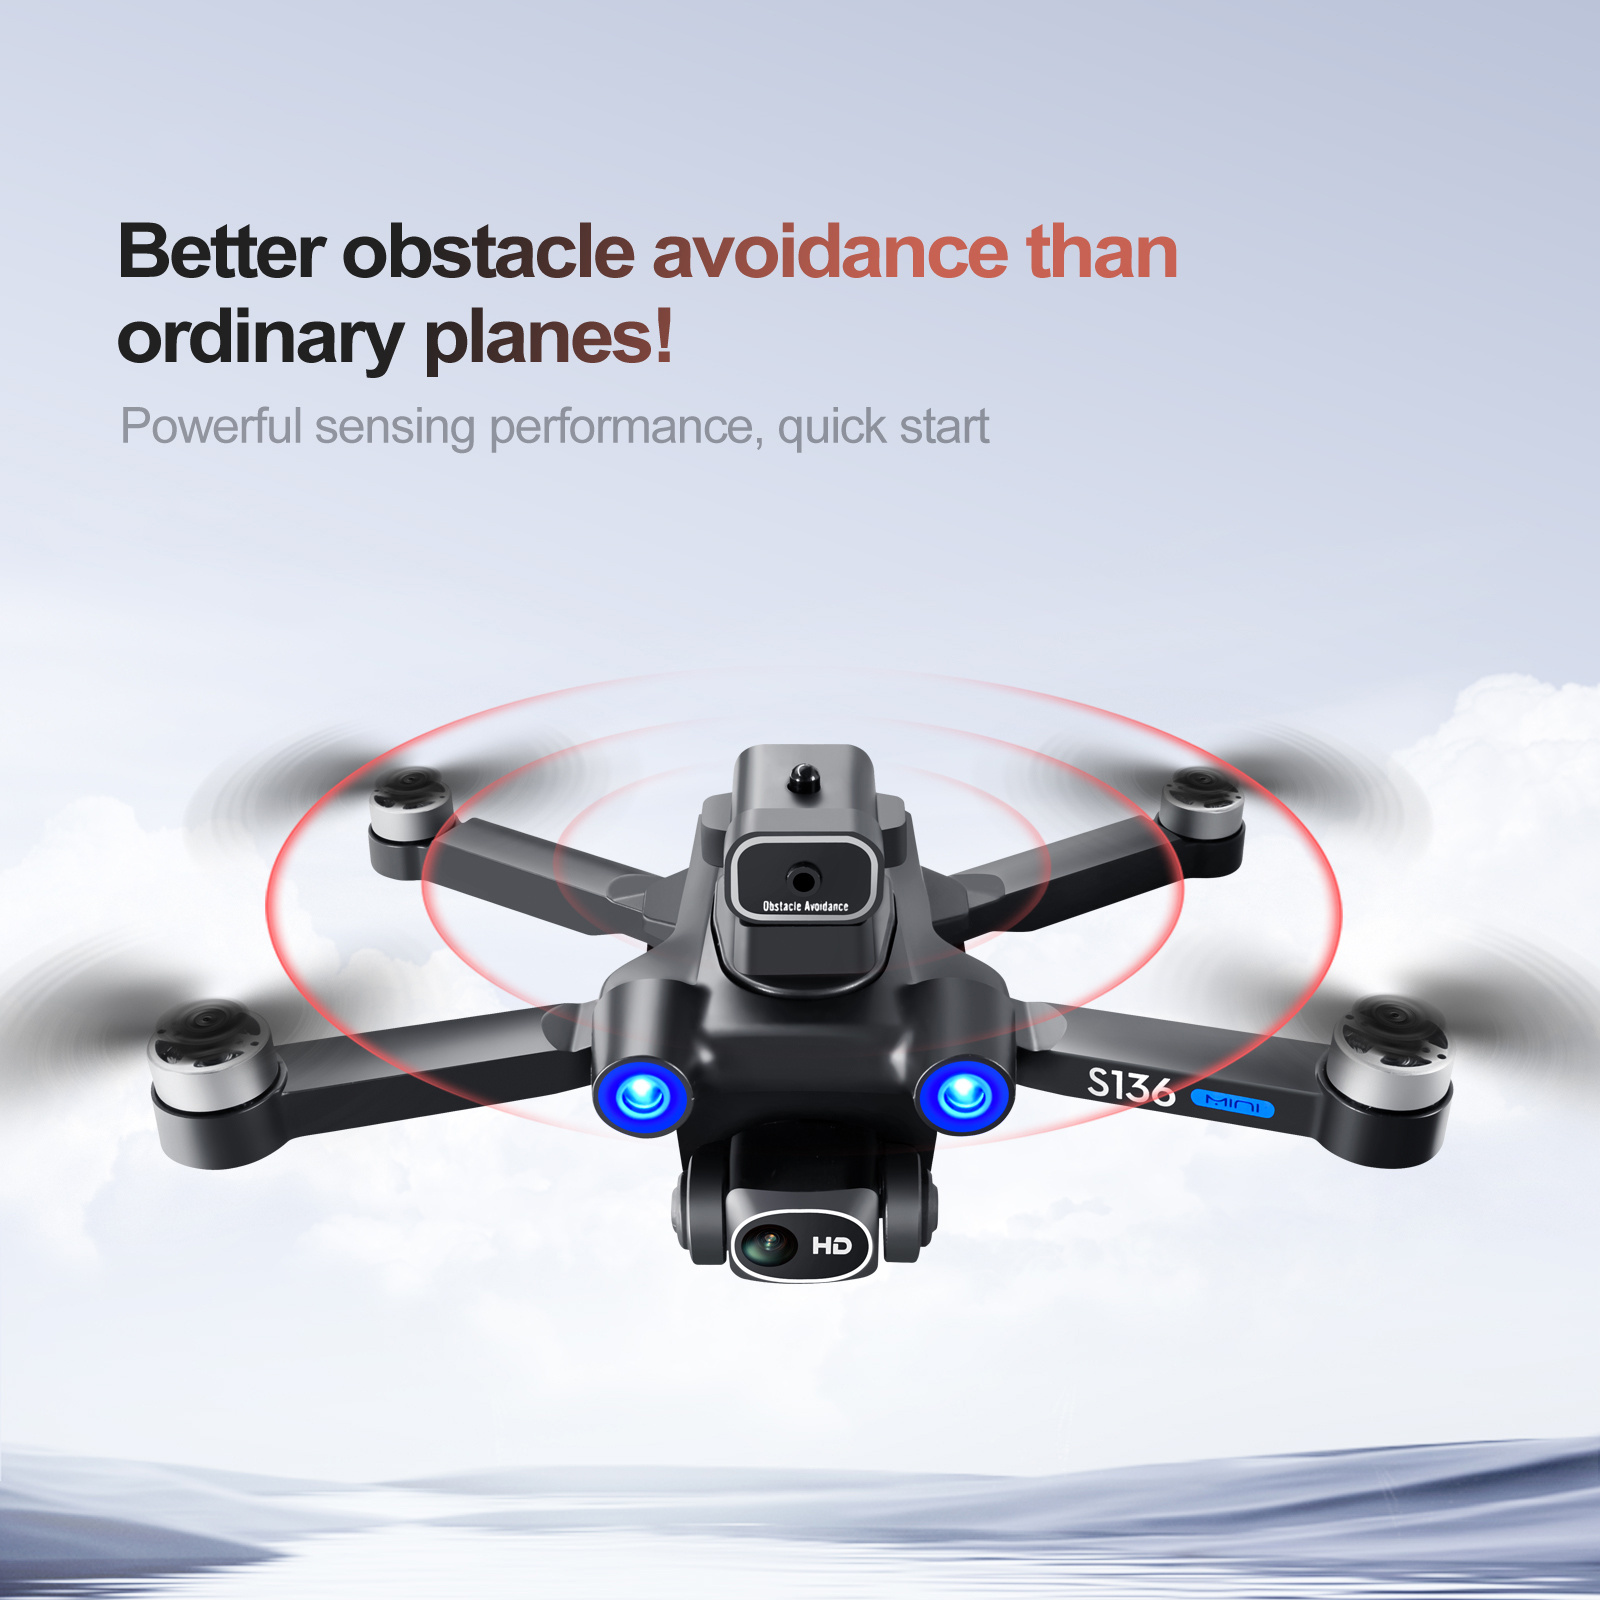 gps positioning drone with brushless motor headless mode intelligent obstacle avoidance optical flow positioning a key return ultra long range intelligent following strong wind resistance details 7